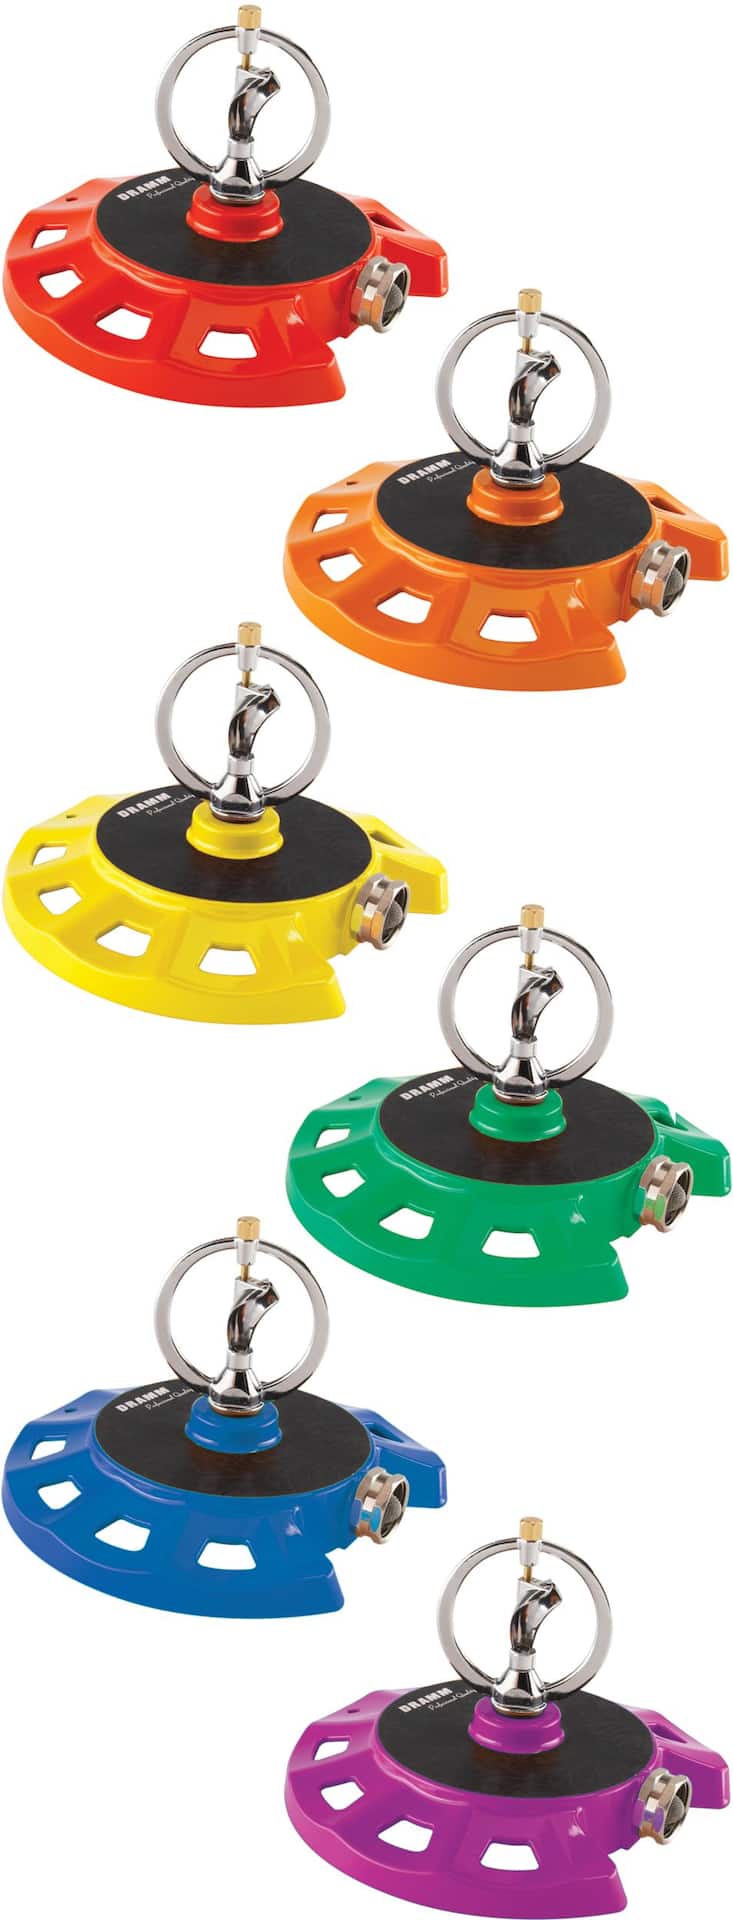 Dramm ColorStorm™ Spinning Sprinkler with a Circular Base, 2150 sq